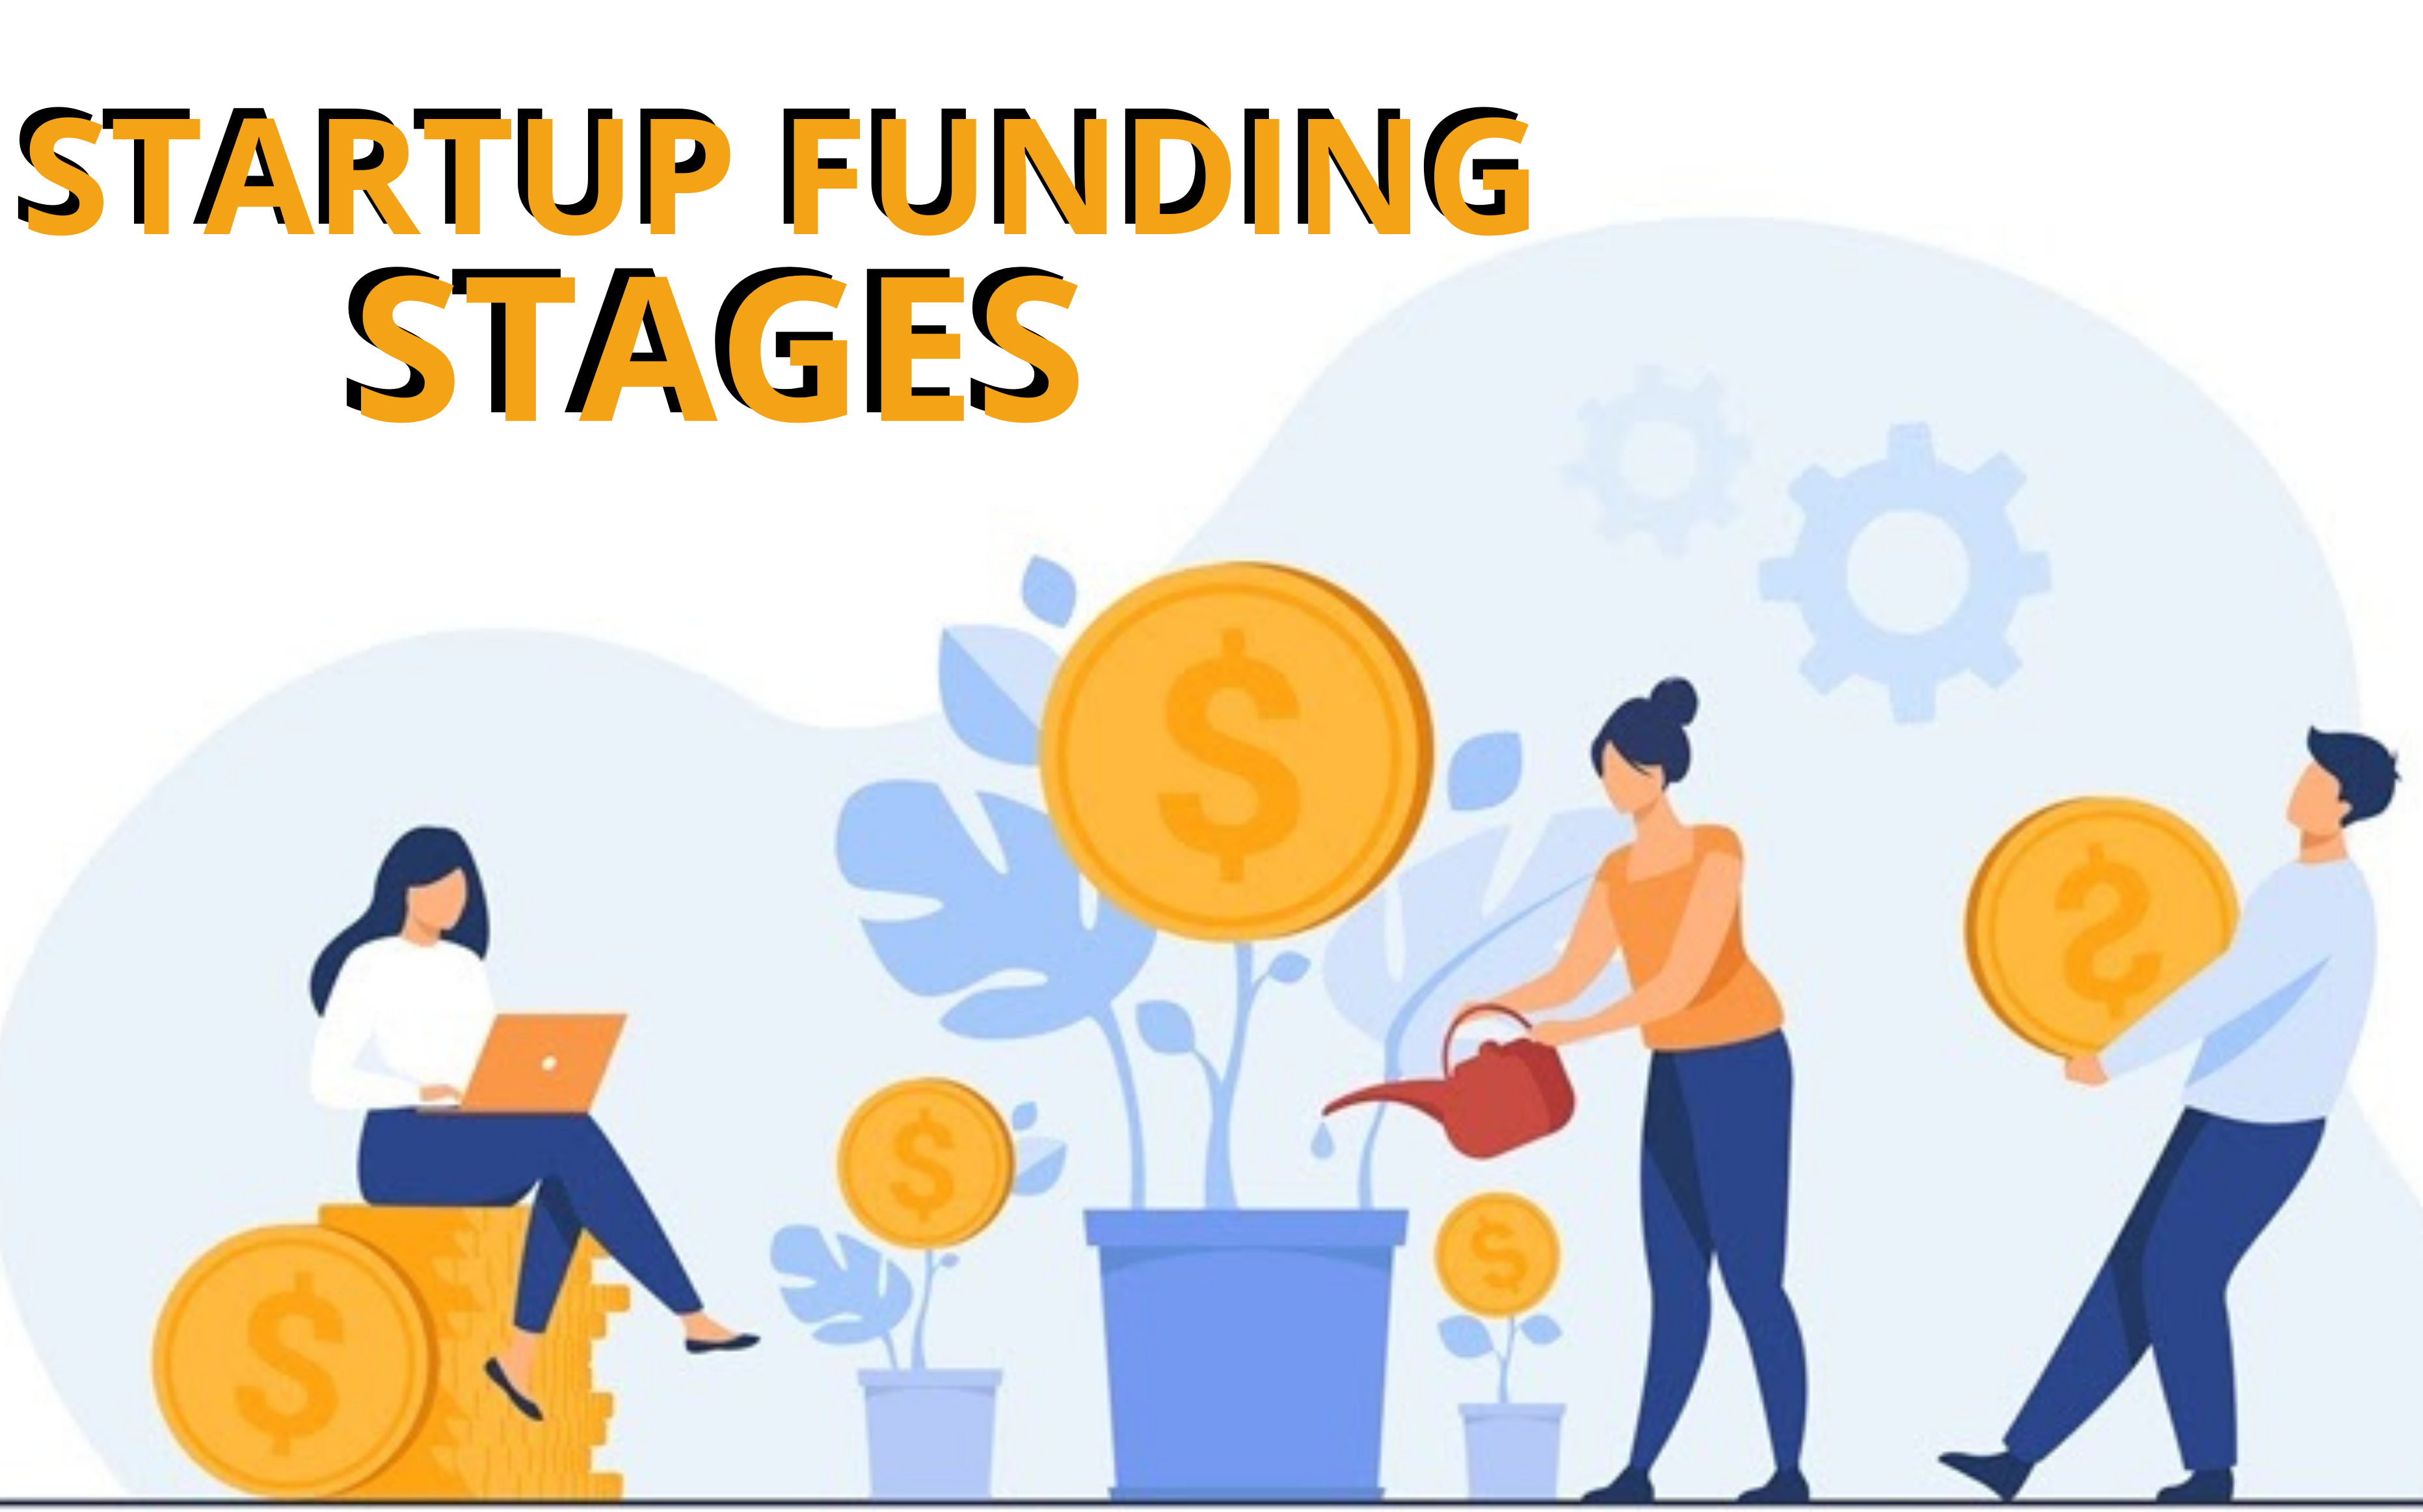 A Step By Step Illustration of Startup Funding Stages